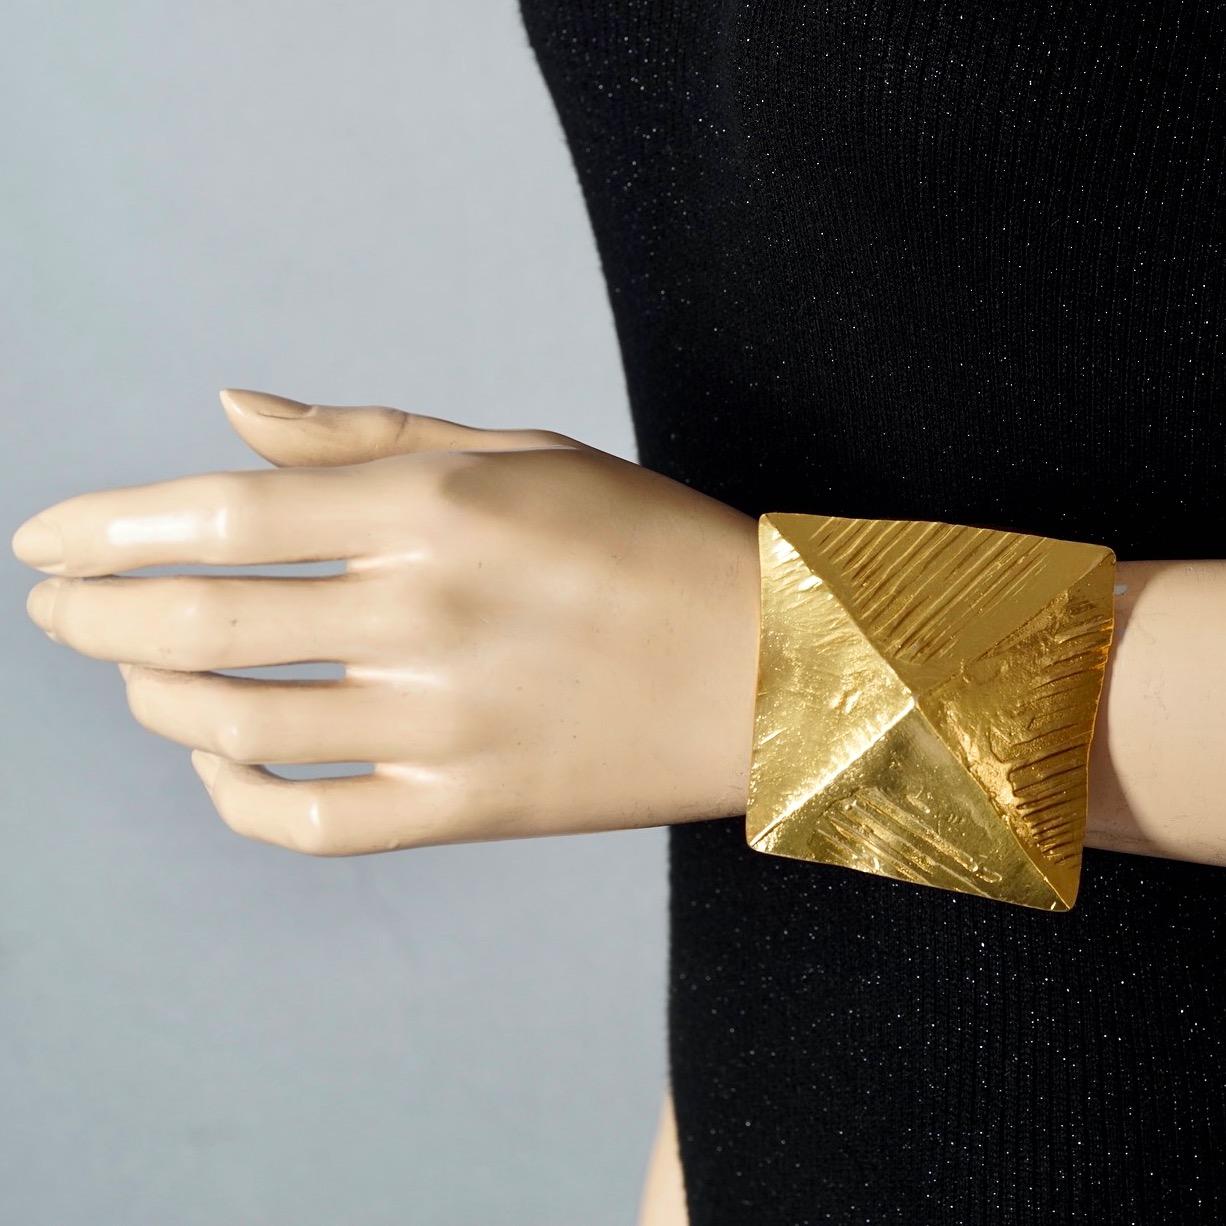 Vintage Massive YVES SAINT LAURENT Ysl Pyramid Textured Cuff Bracelet

Measurements:
Height: 2.56 inches (6.5 cm)
Inner Circumference: 6.69 inches (17 cm) opening included

Features:
- 100% YVES SAINT LAURENT.
- Massive textured cuff bracelet with